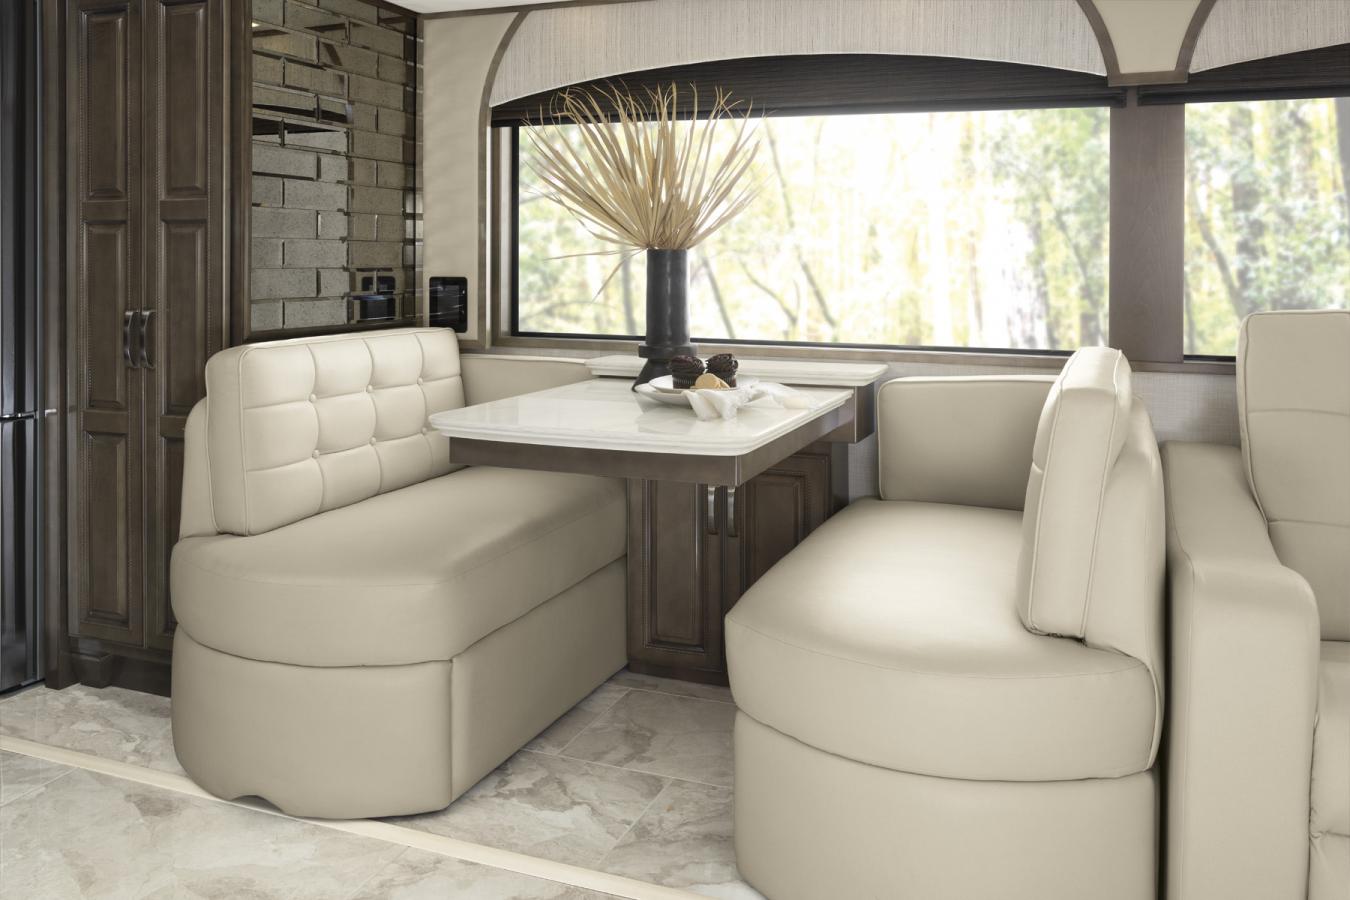 Dinette in the interior of the Essex